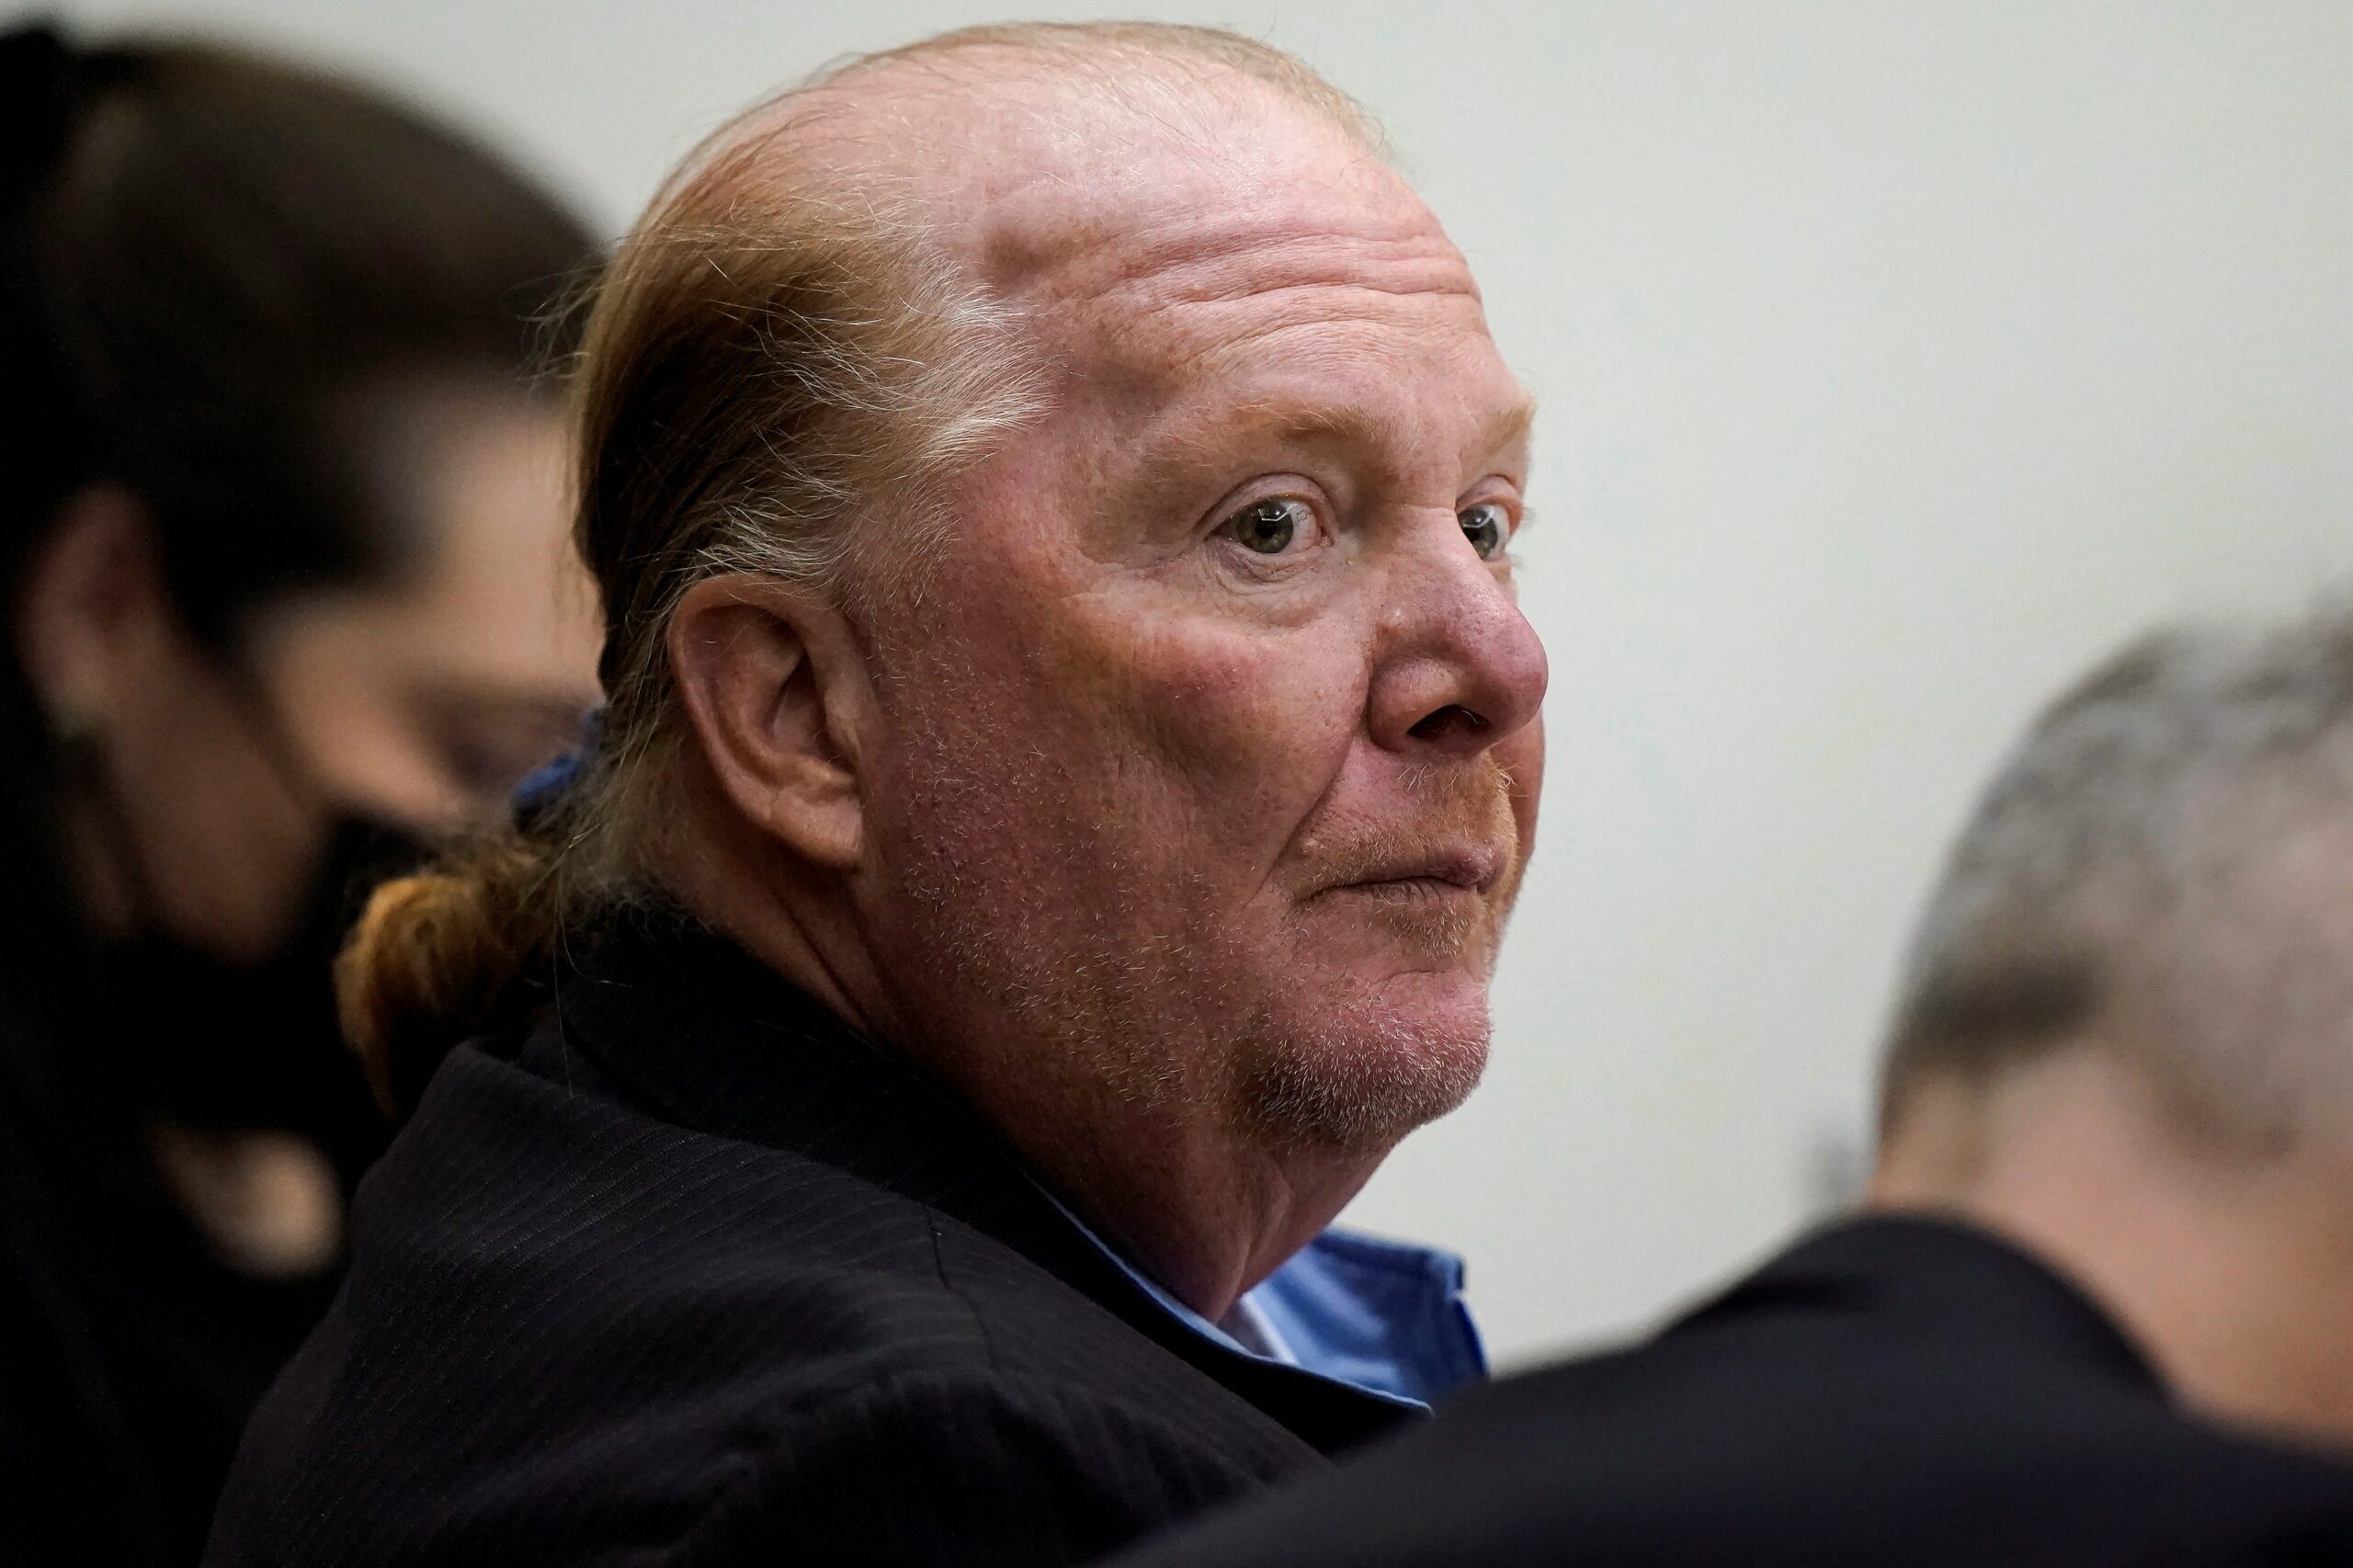 Woman says celebrity chef Mario Batali groped her at Boston bar